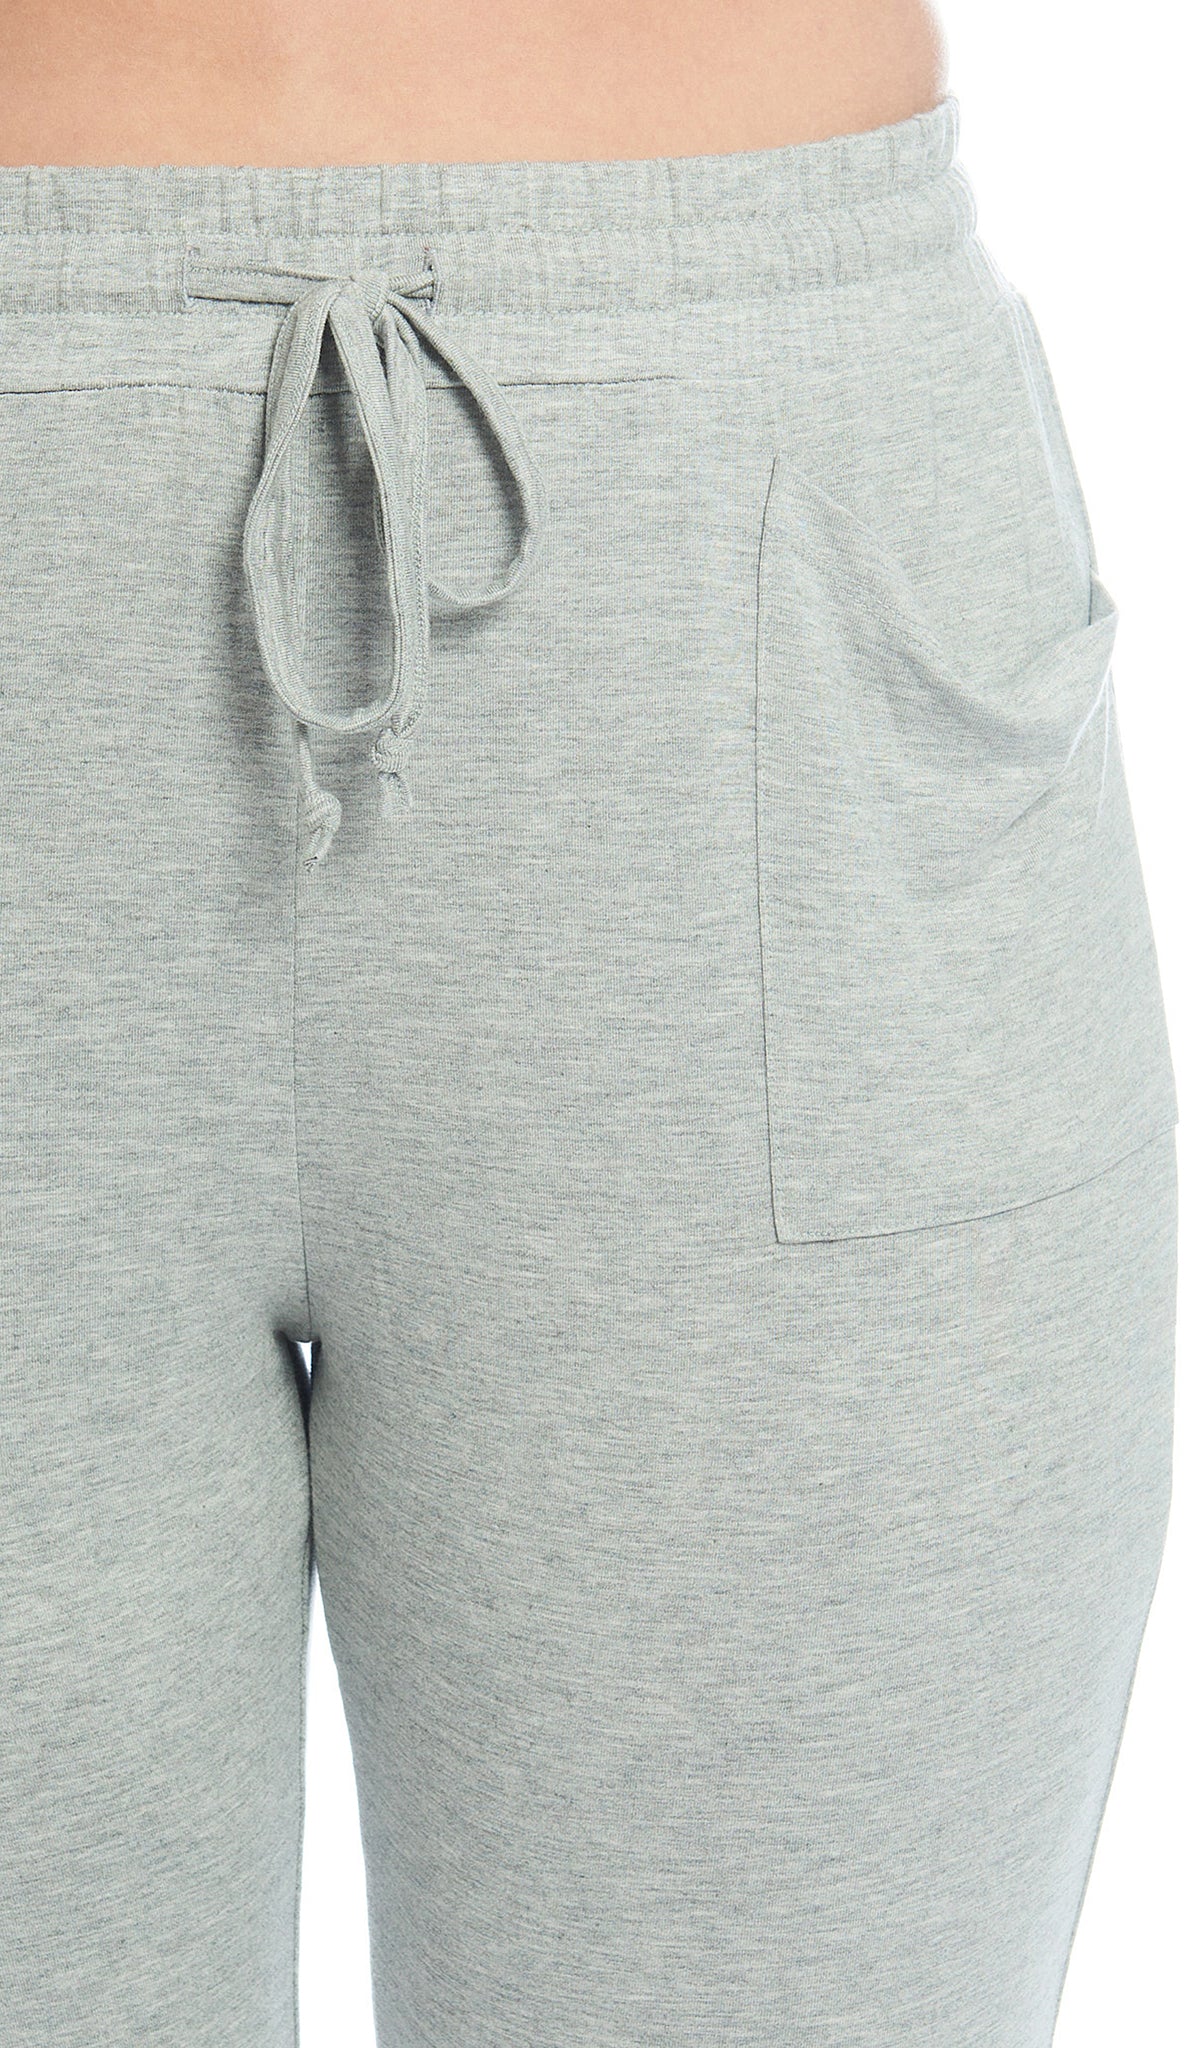 Heather Grey Solid Whitney 2-Piece drawstring waistband and pocket detail.